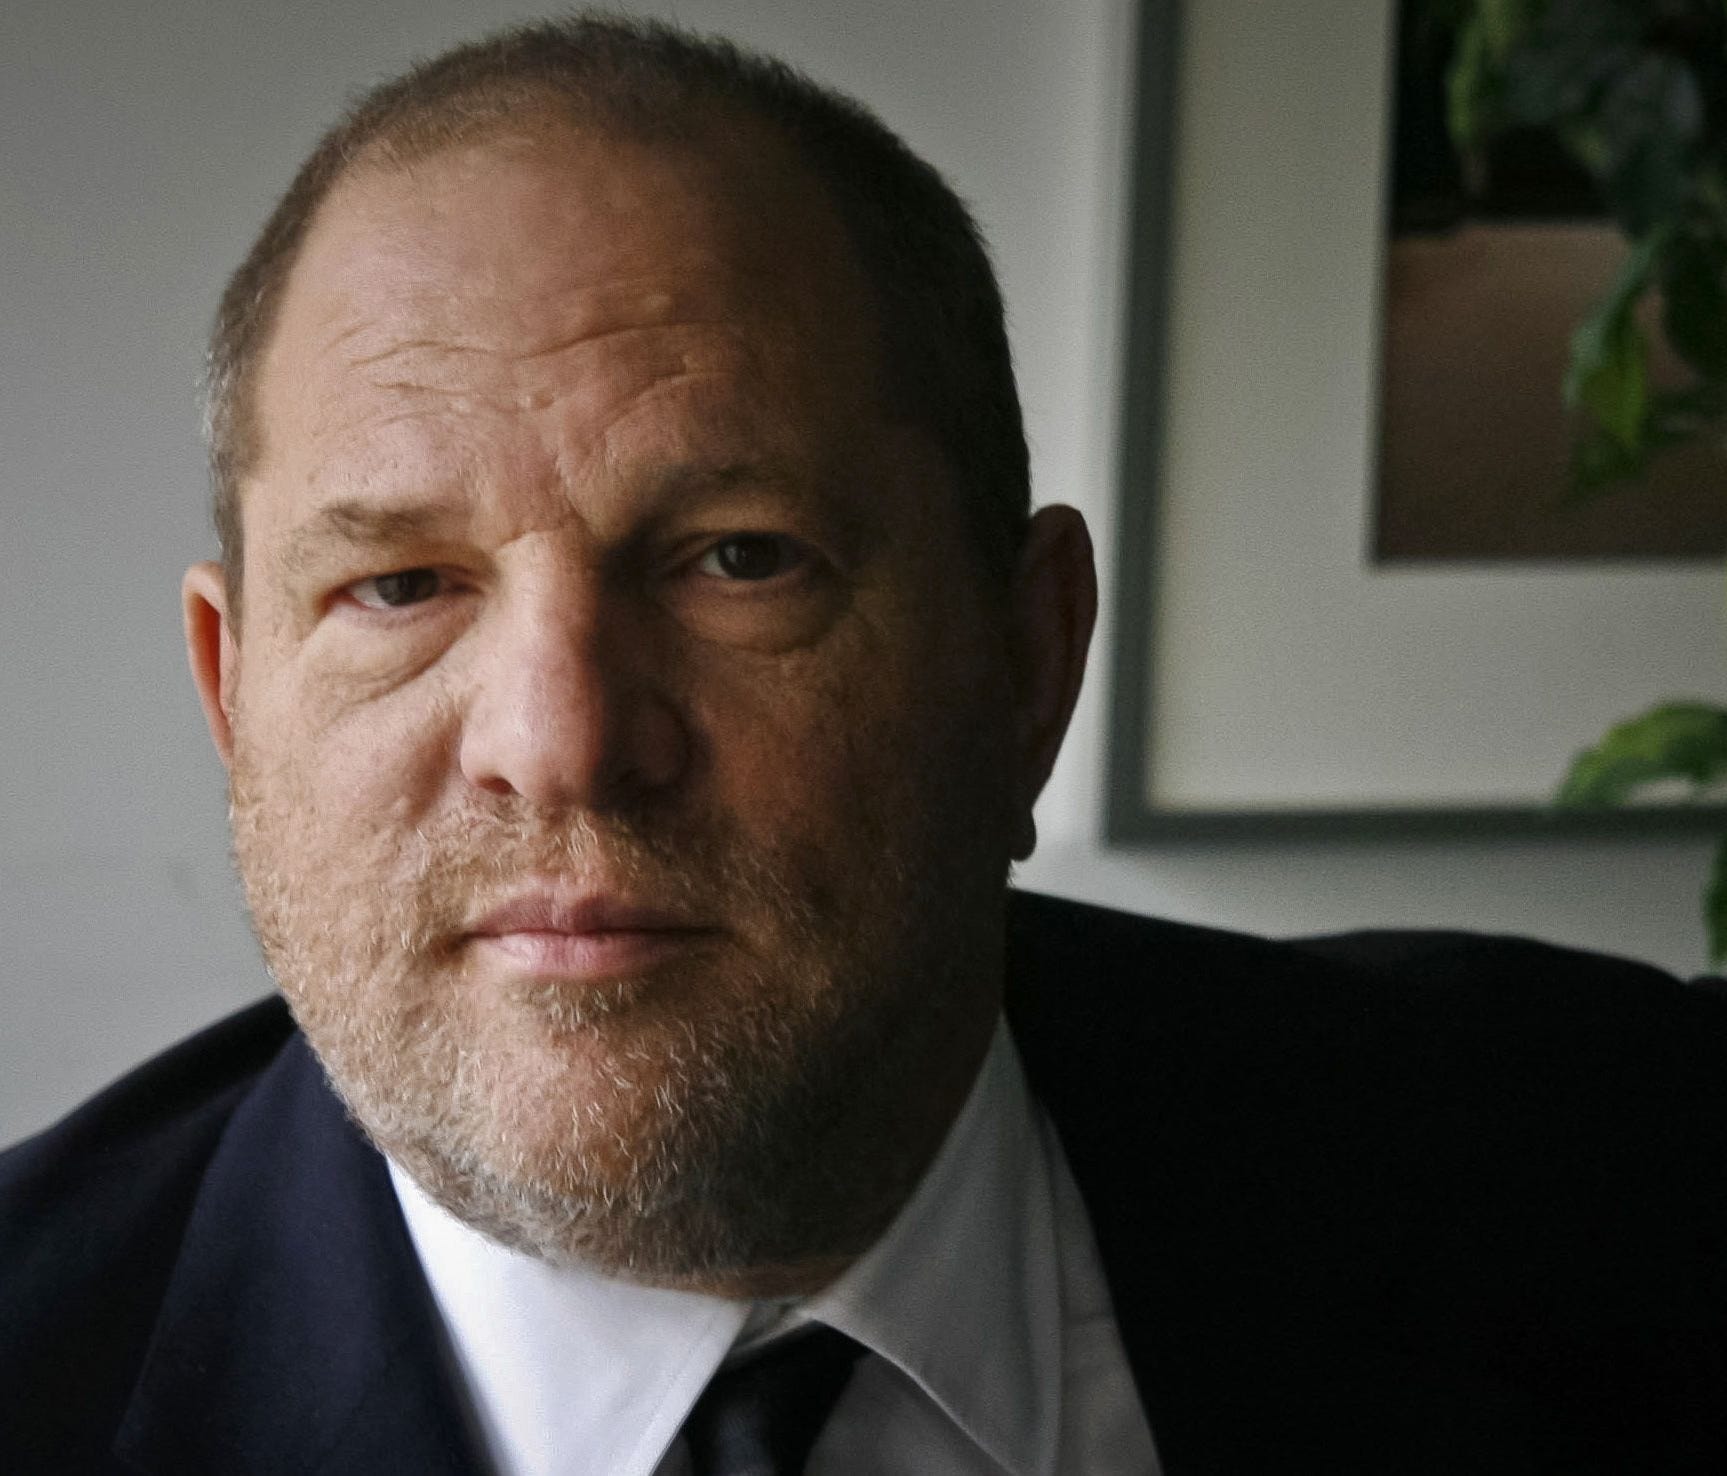 The Weinstein Co.'s board of directors says the company, co-founded in 2005 by Harvey Weinstein (pictured), is expected to file for bankruptcy protection after last-ditch talks to sell its assets collapsed.